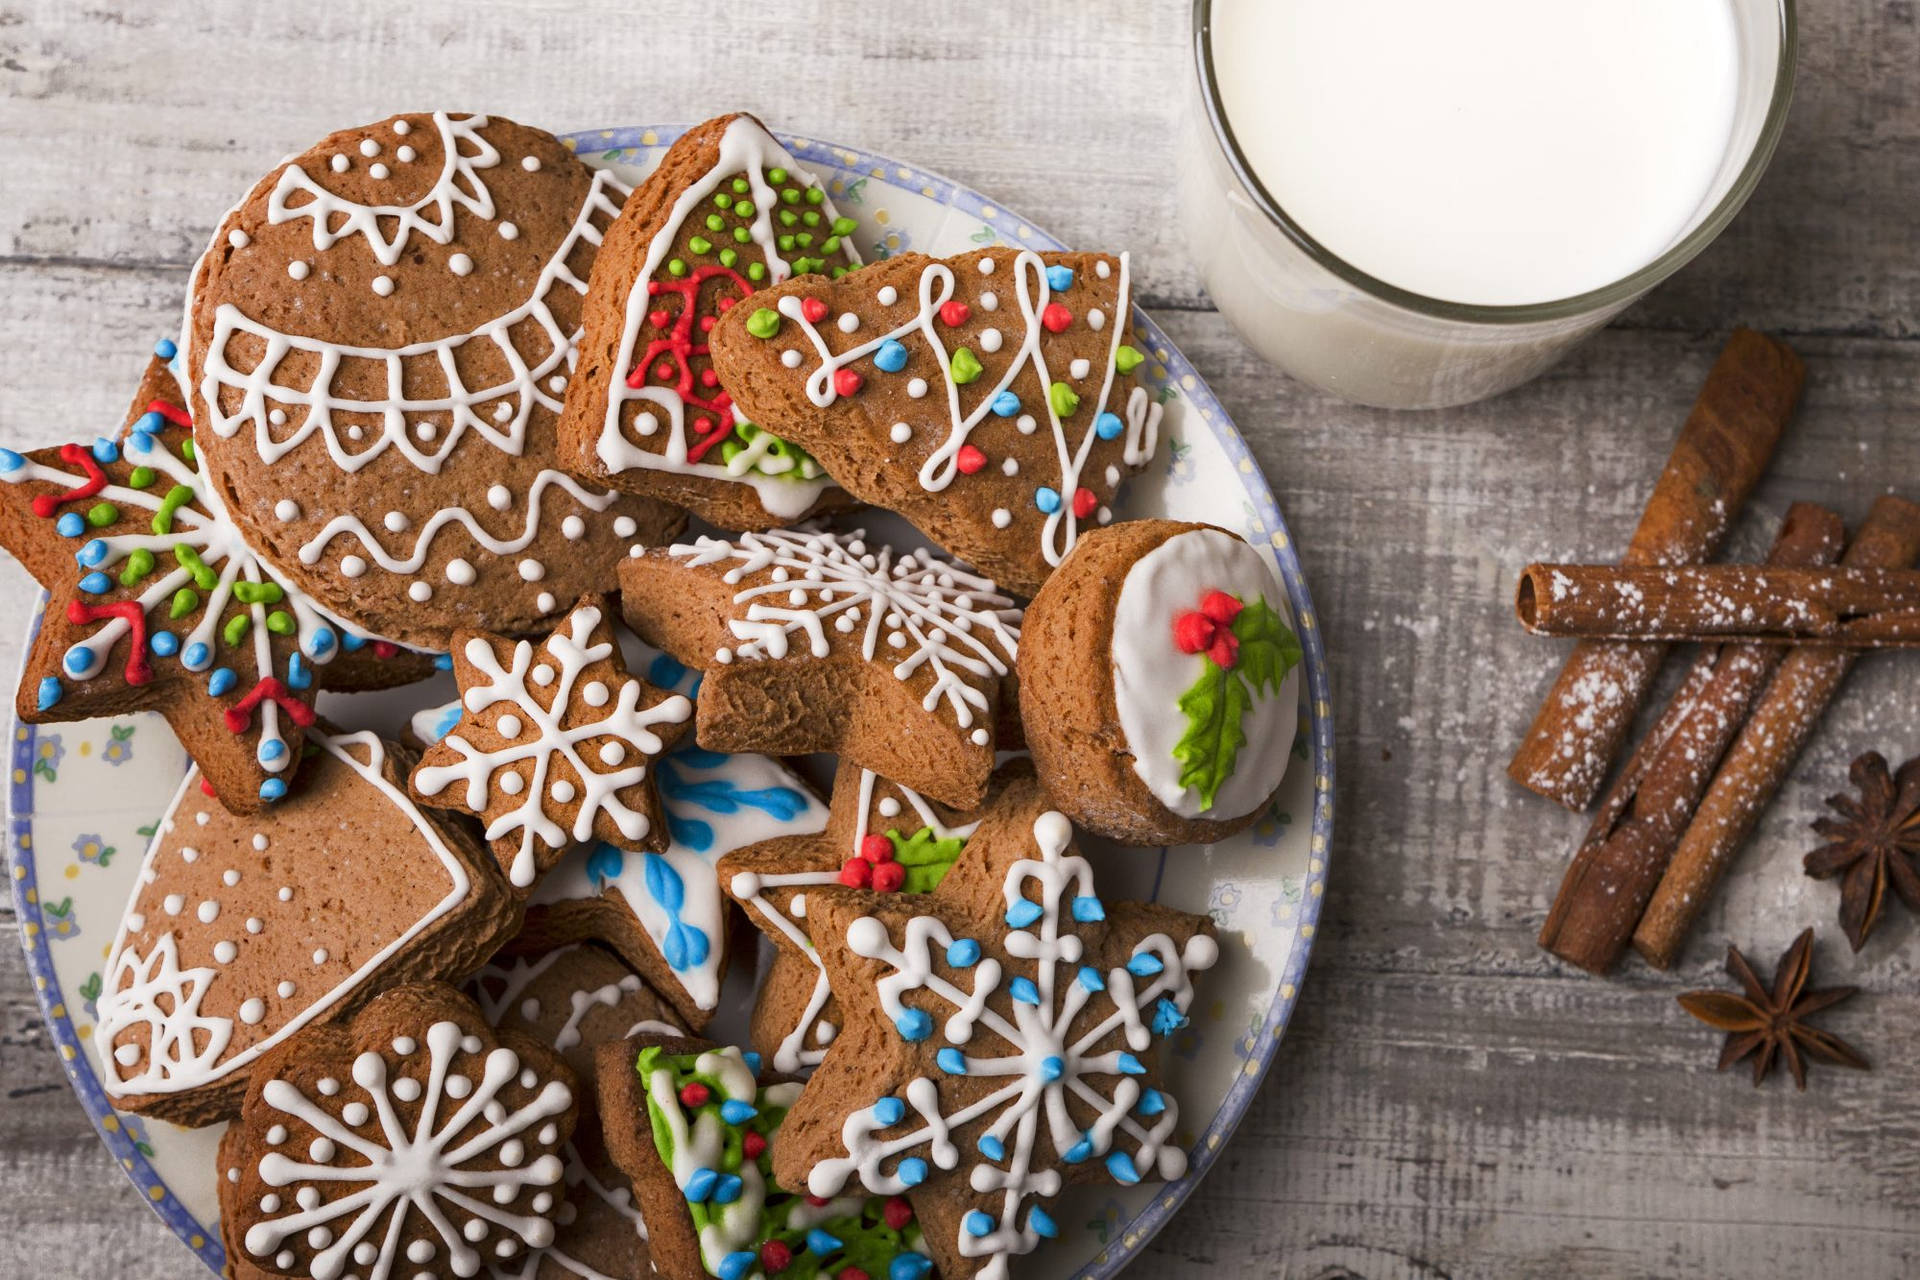 Caption: Delicious Christmas Cookies With Milk And Cinnamon Background